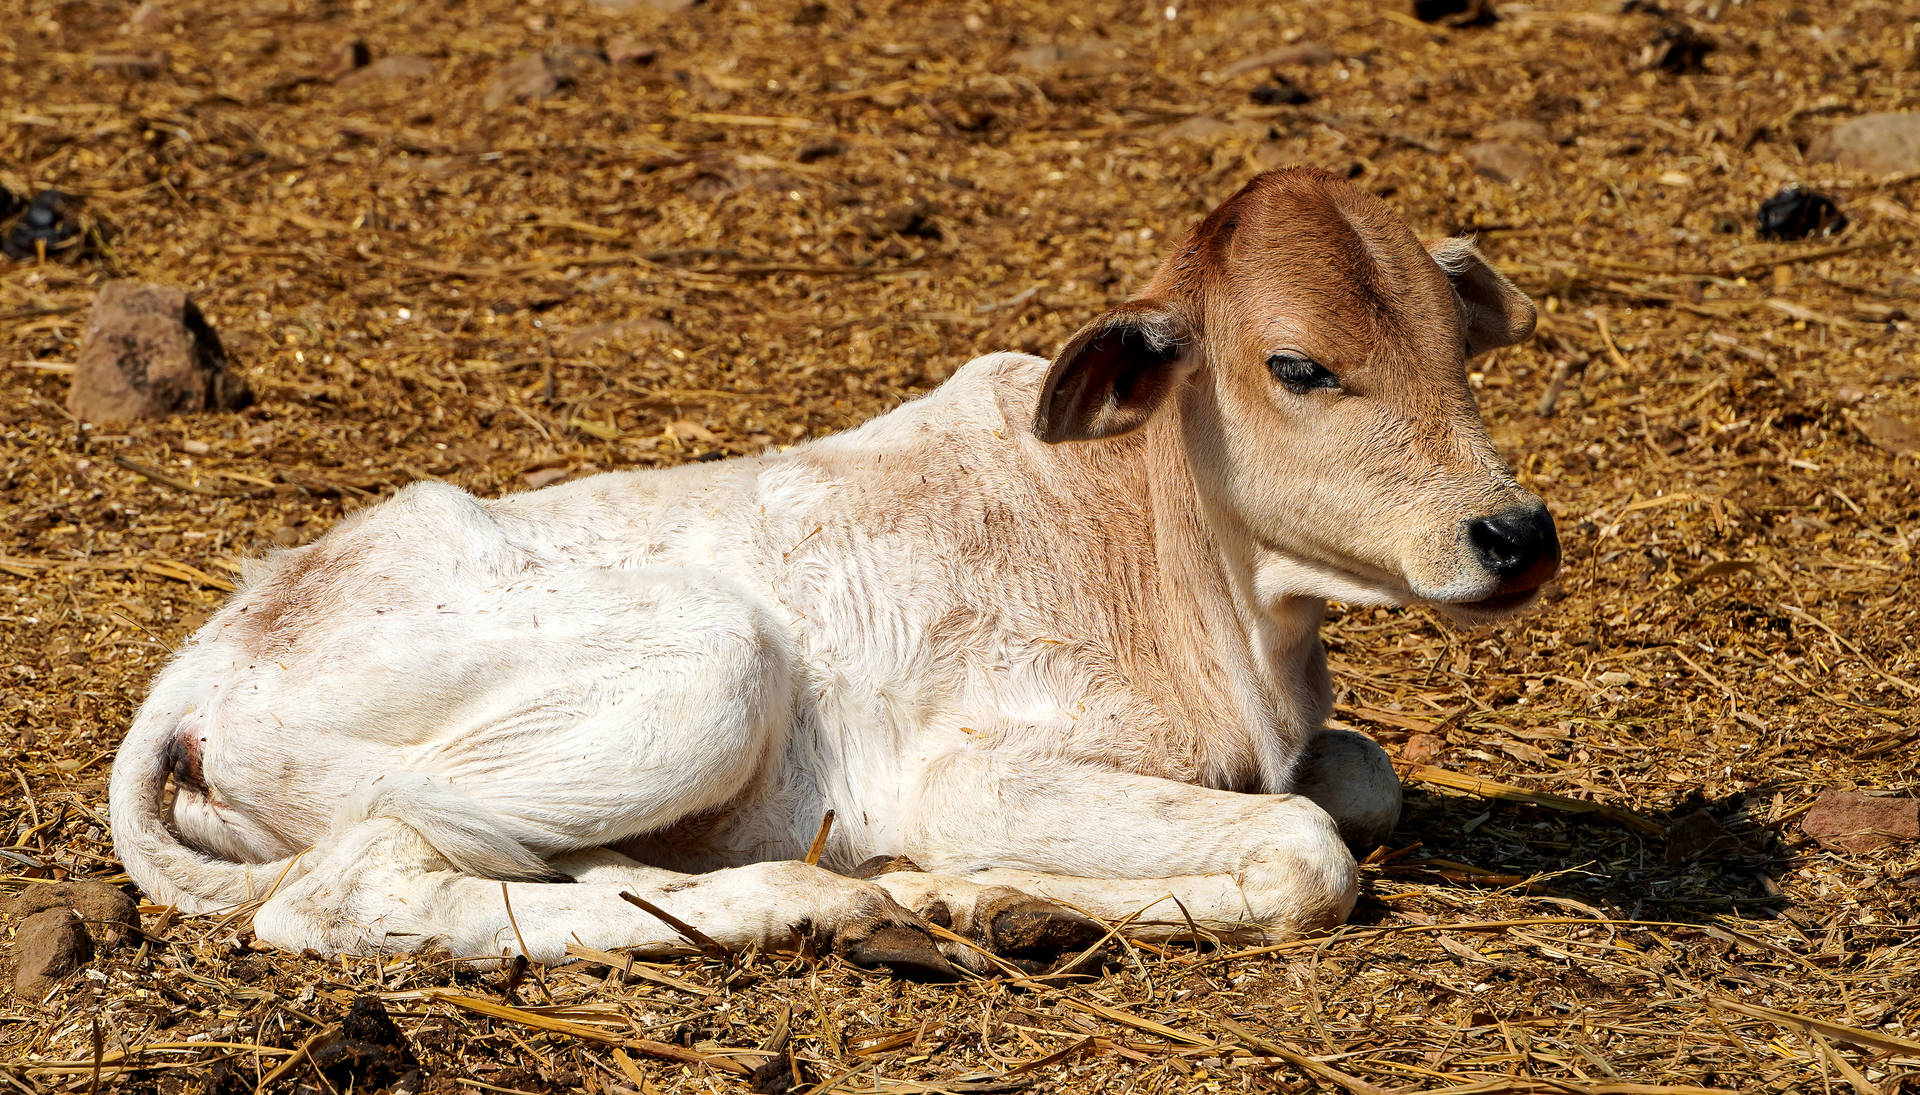 Cute Cow Lying Down On Soil Background